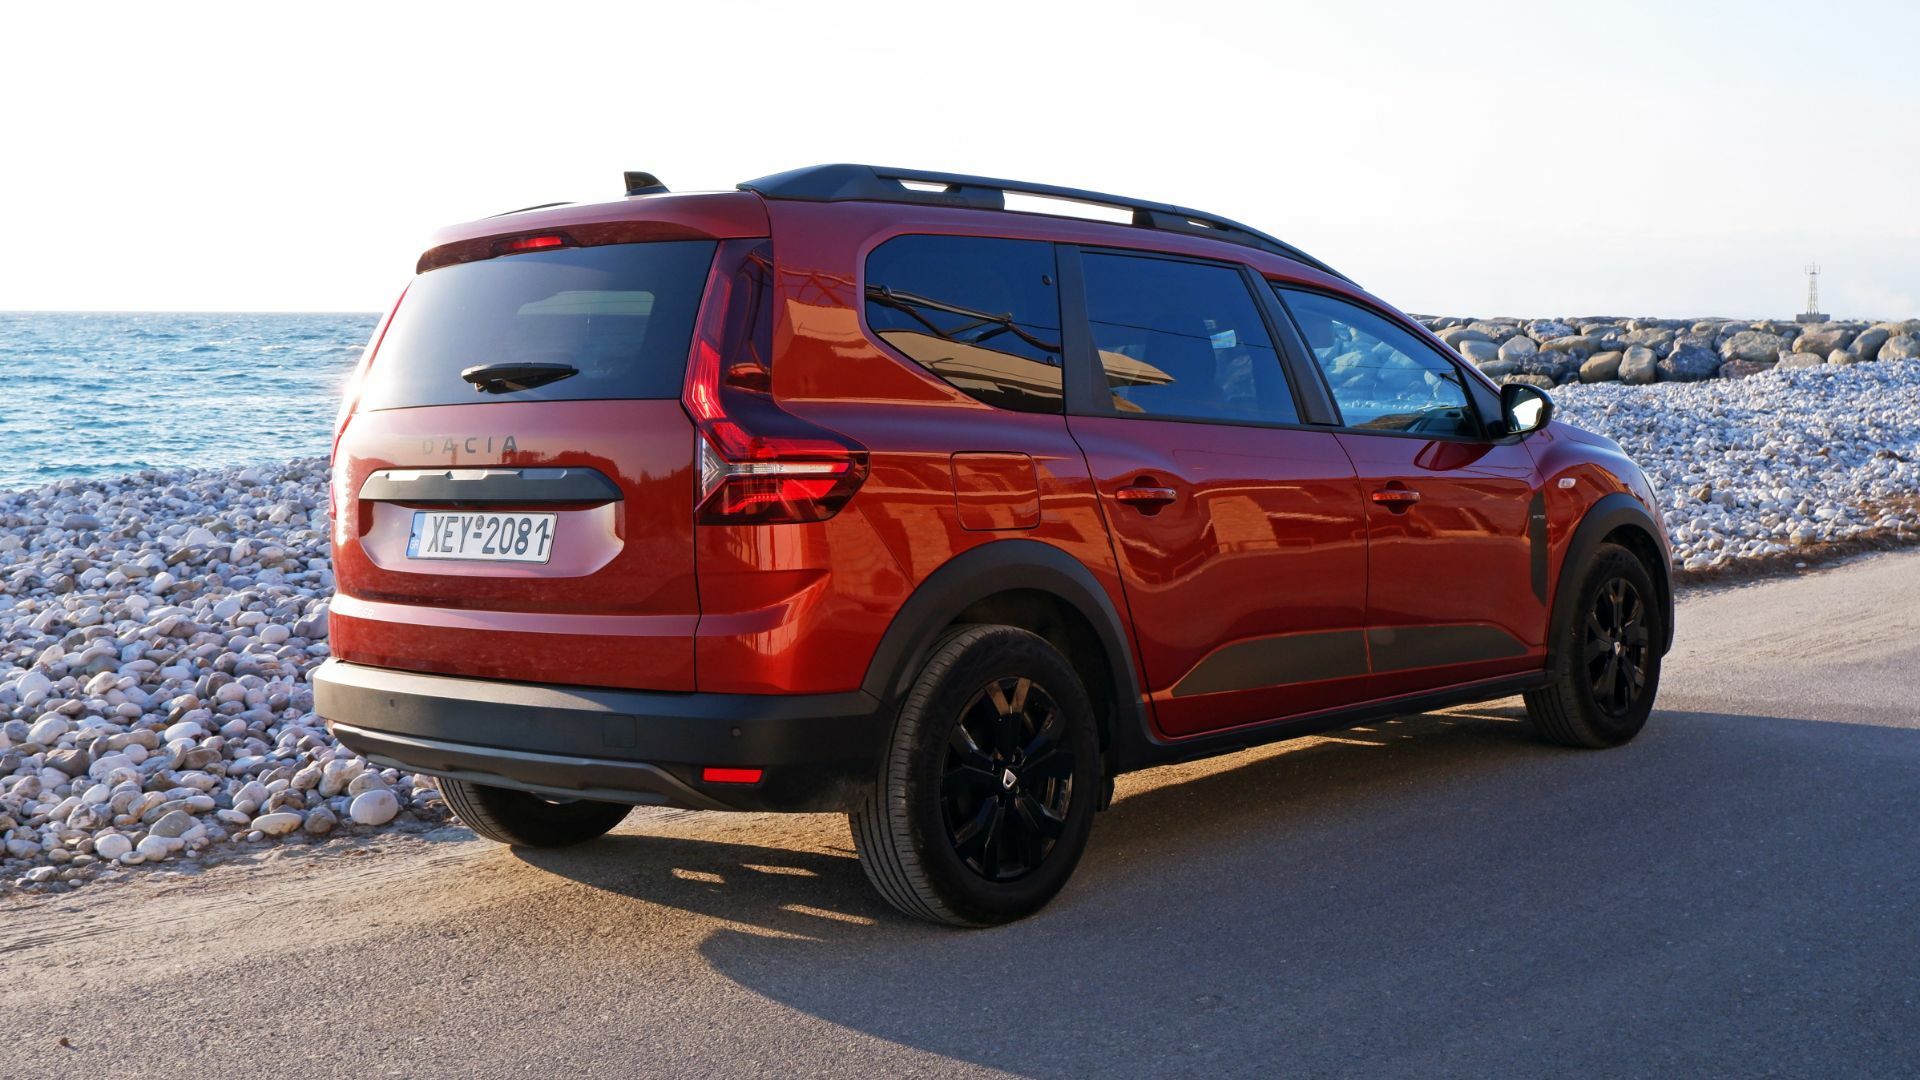 Converting The Dacia Jogger Into A Budget Four-Seater Limo | Carscoops